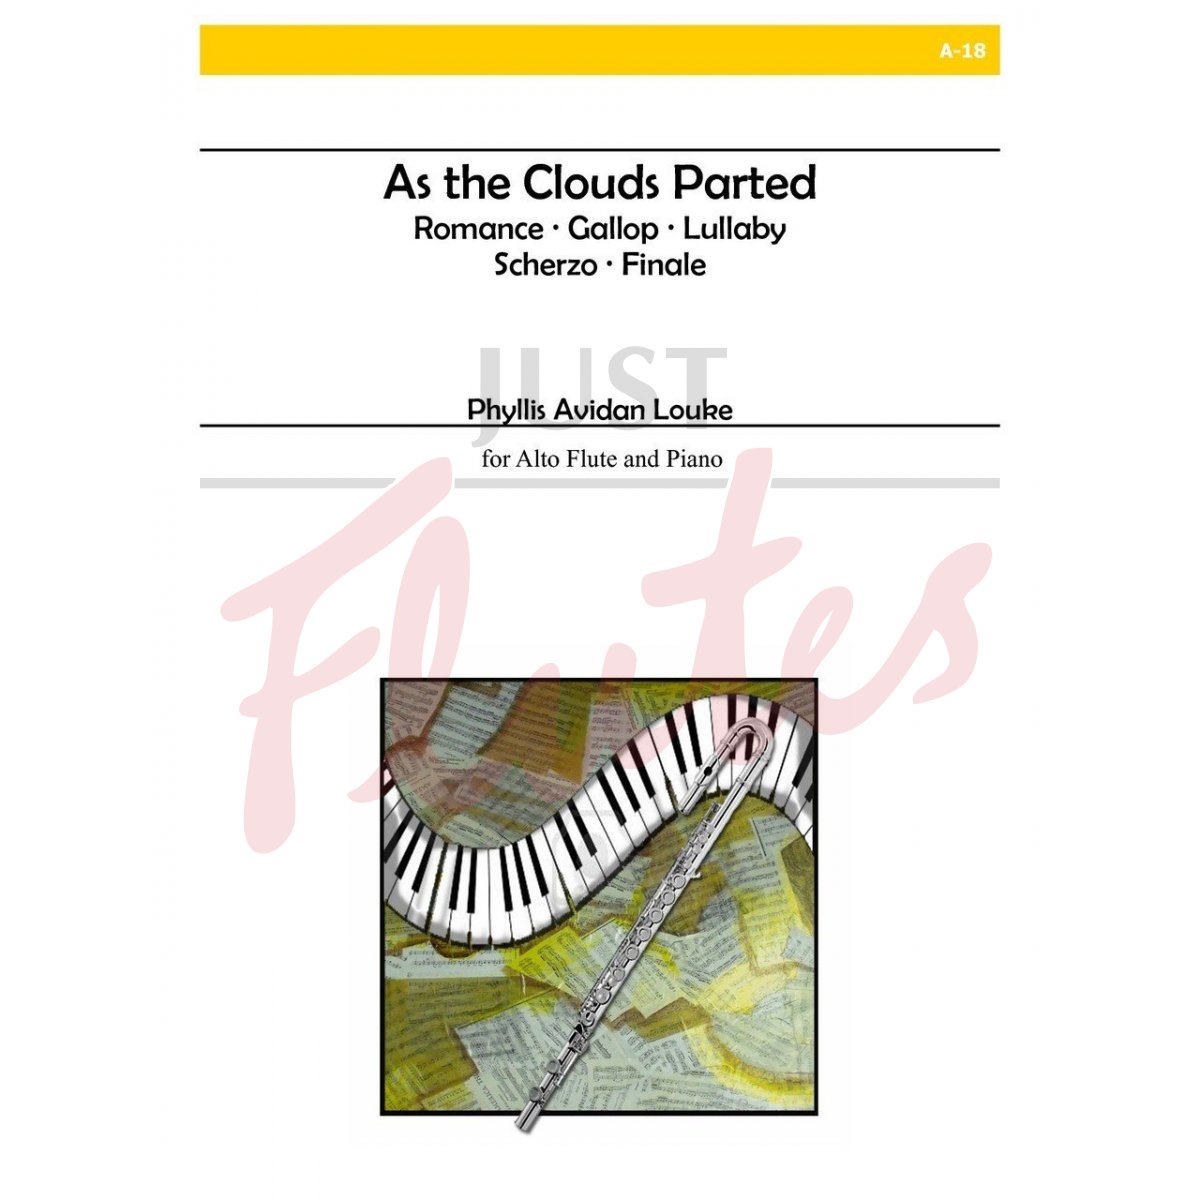 As the Clouds Parted for Alto Flute and Piano